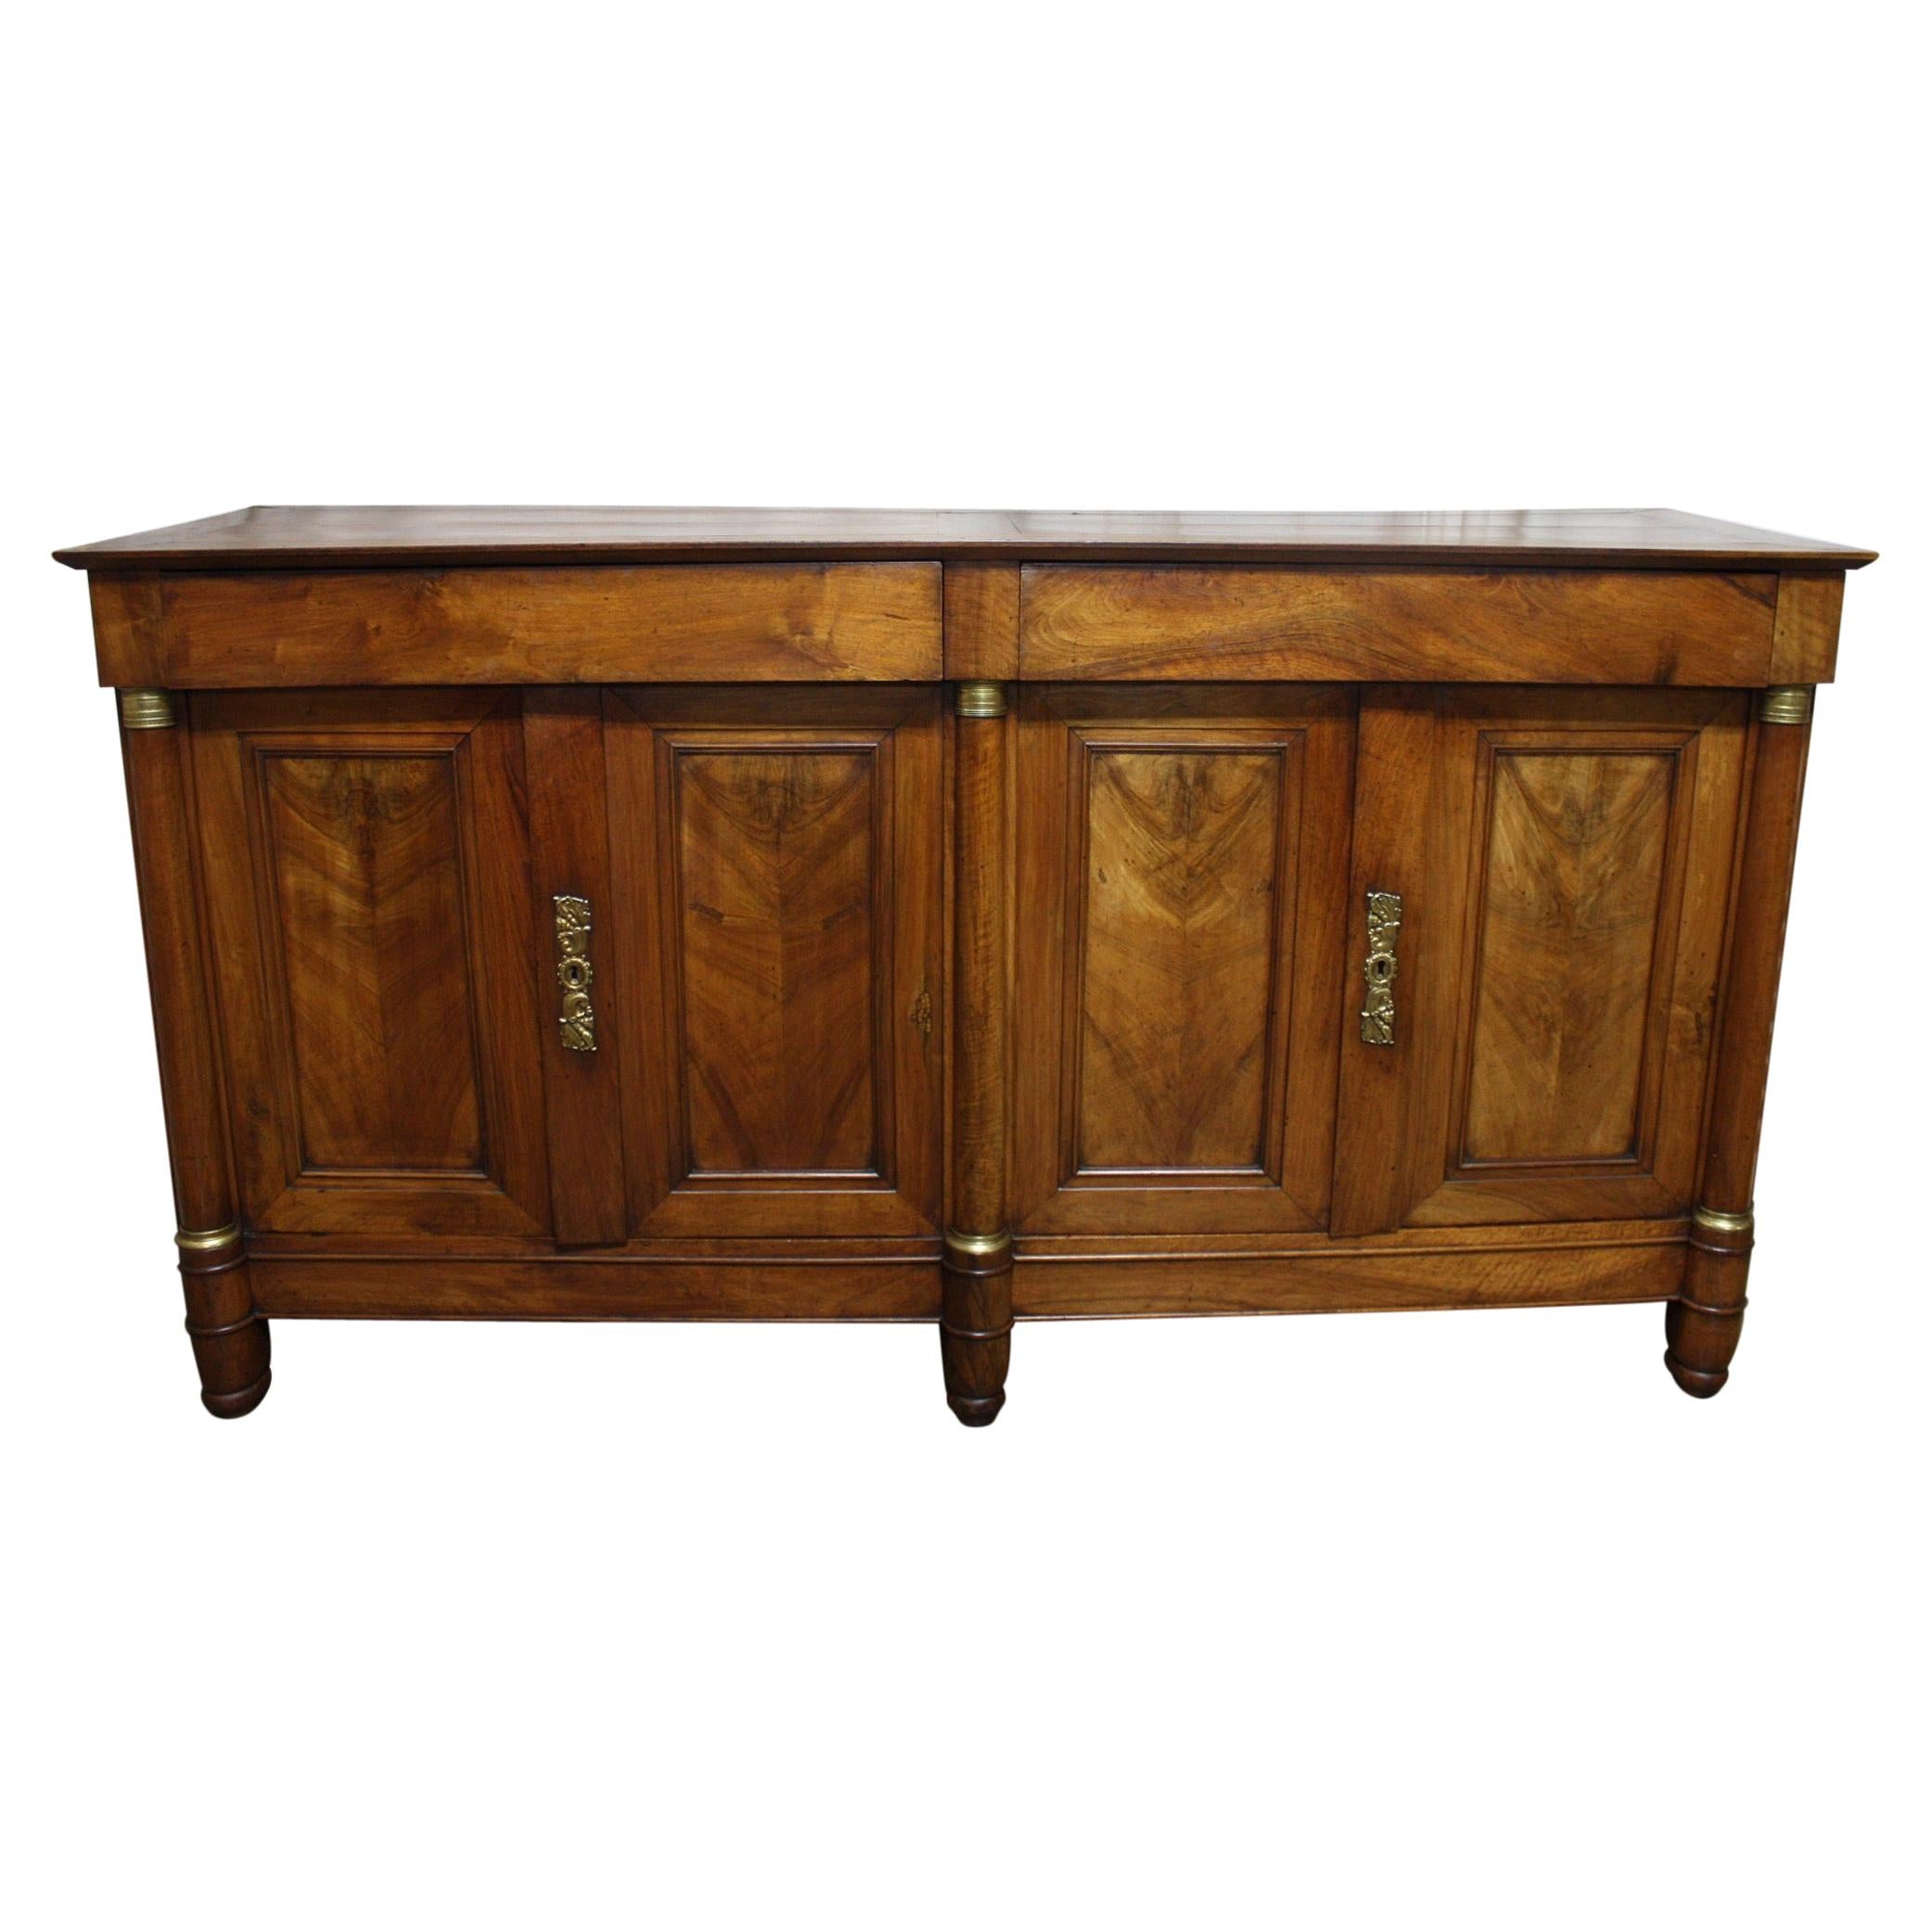 French Empire Period Sideboard